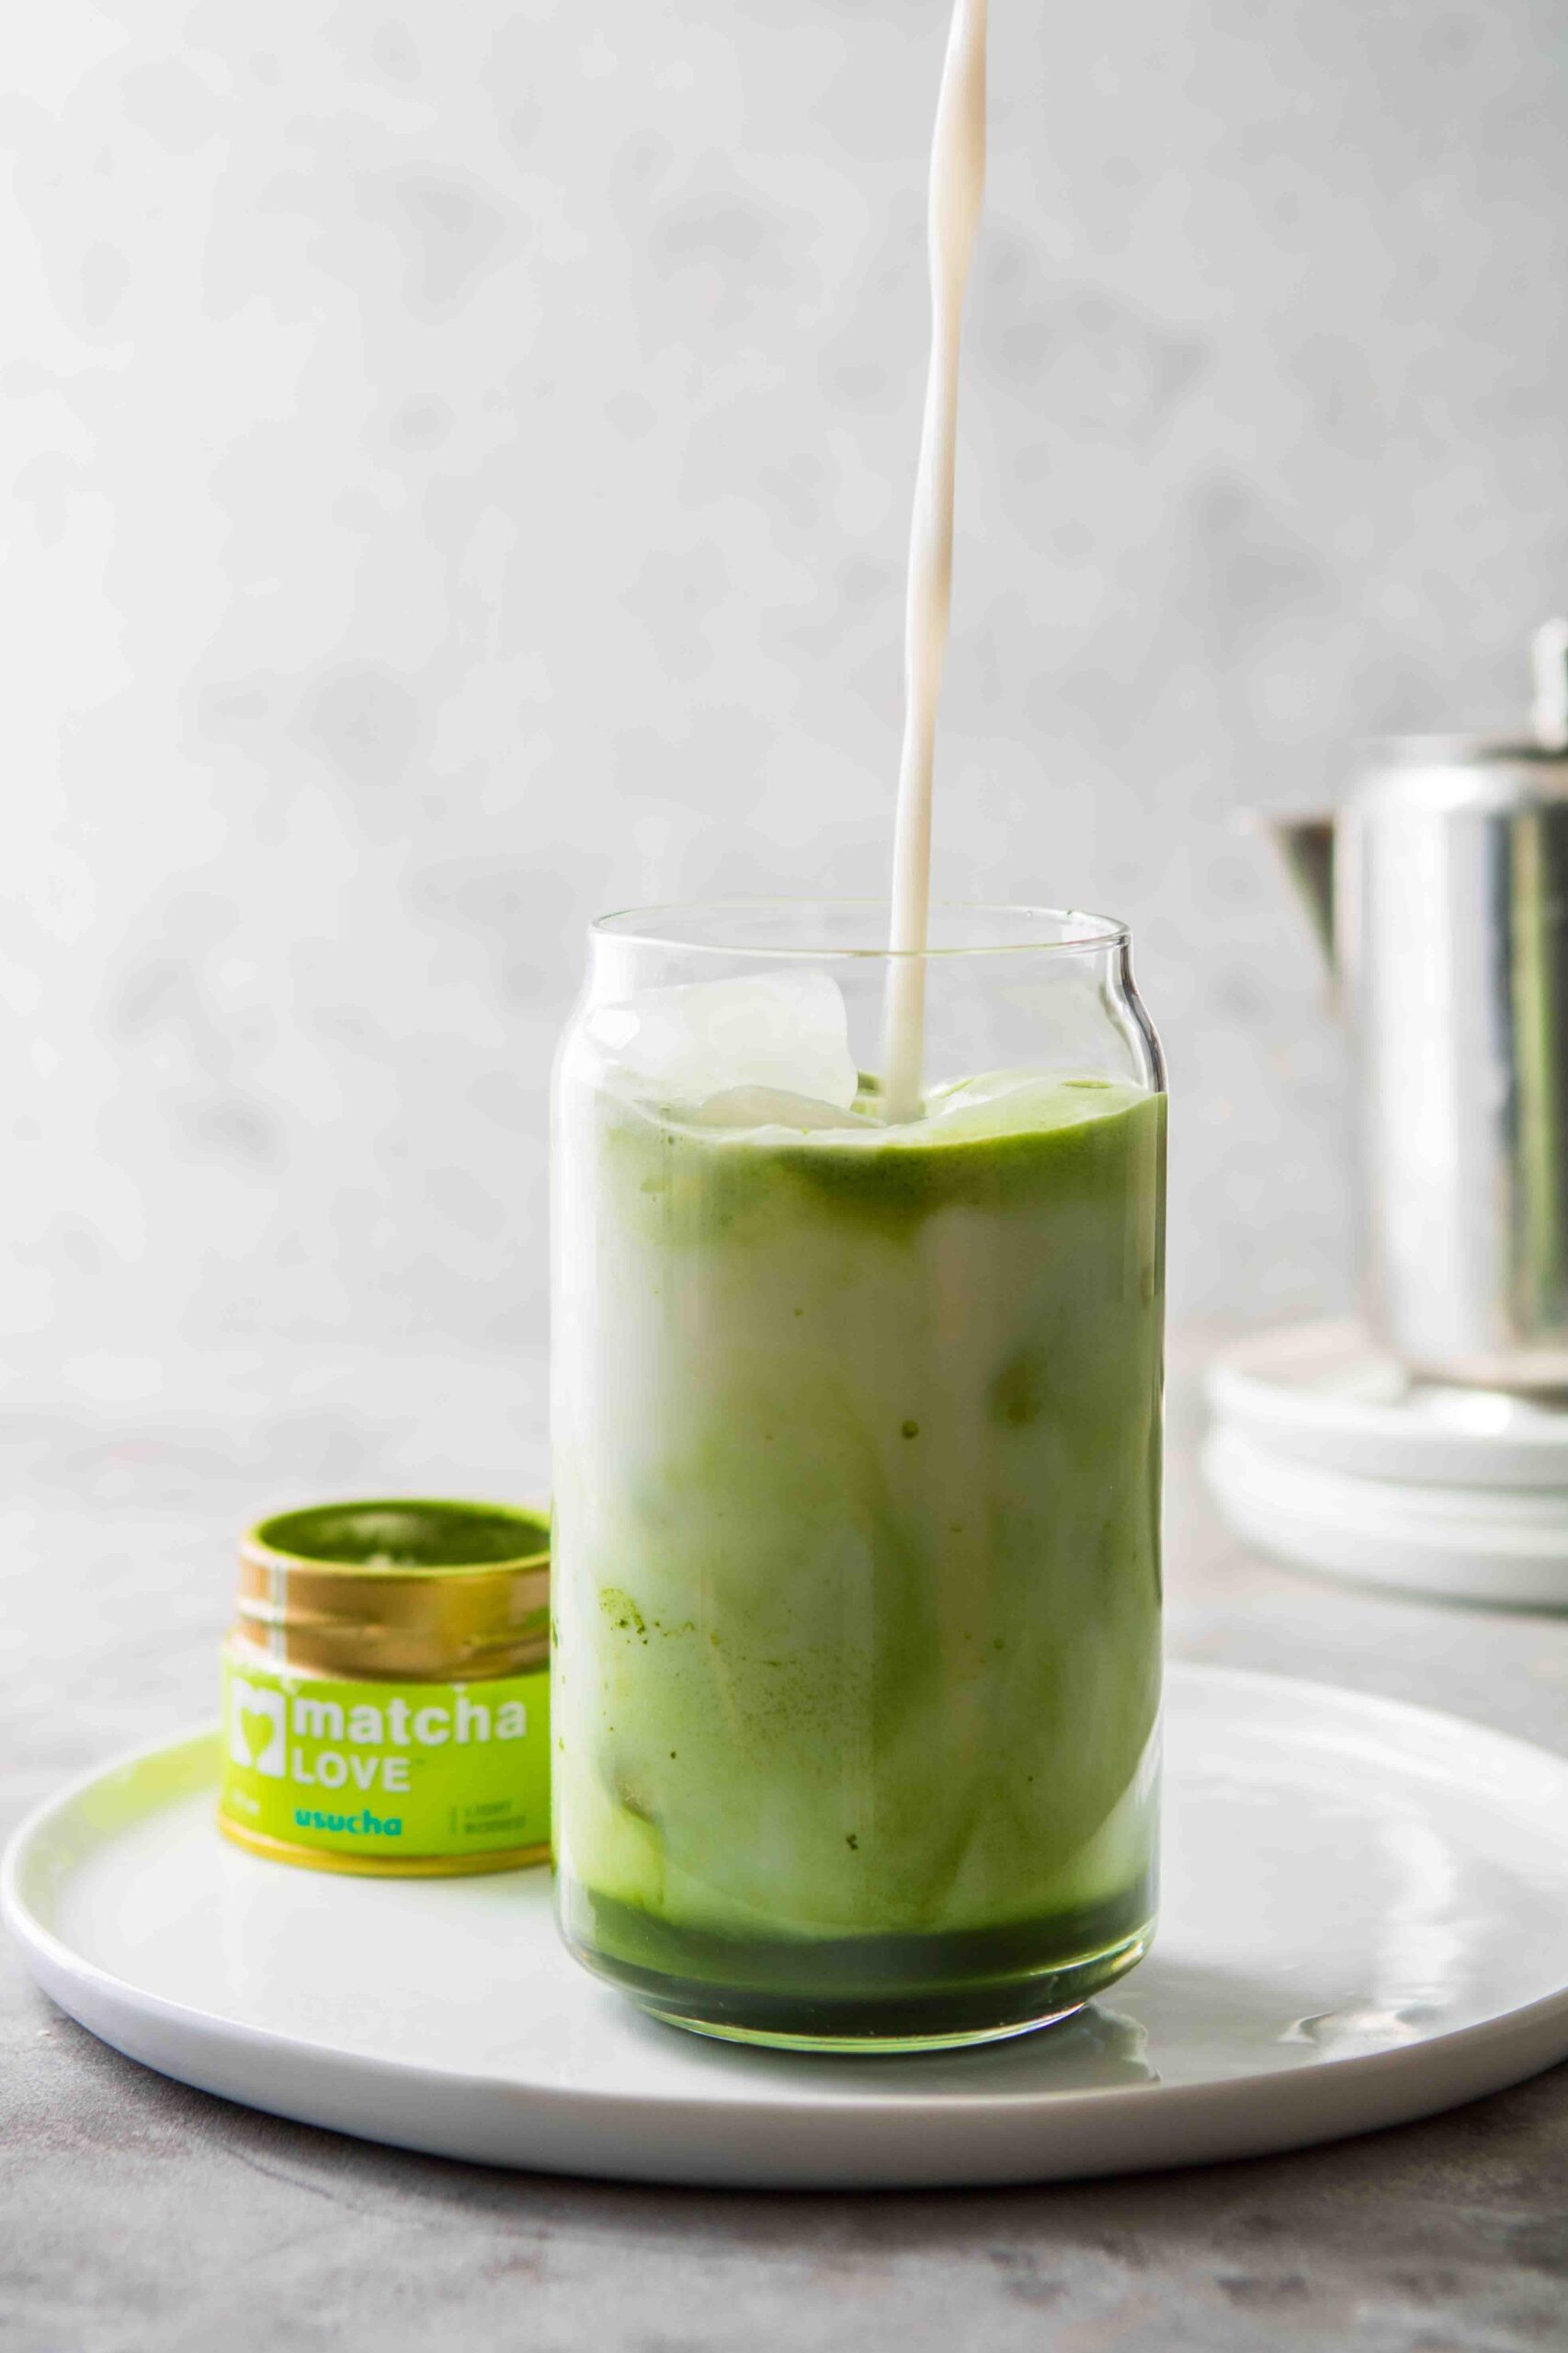  Who knew matcha could be so easy to make and so scrumptious?